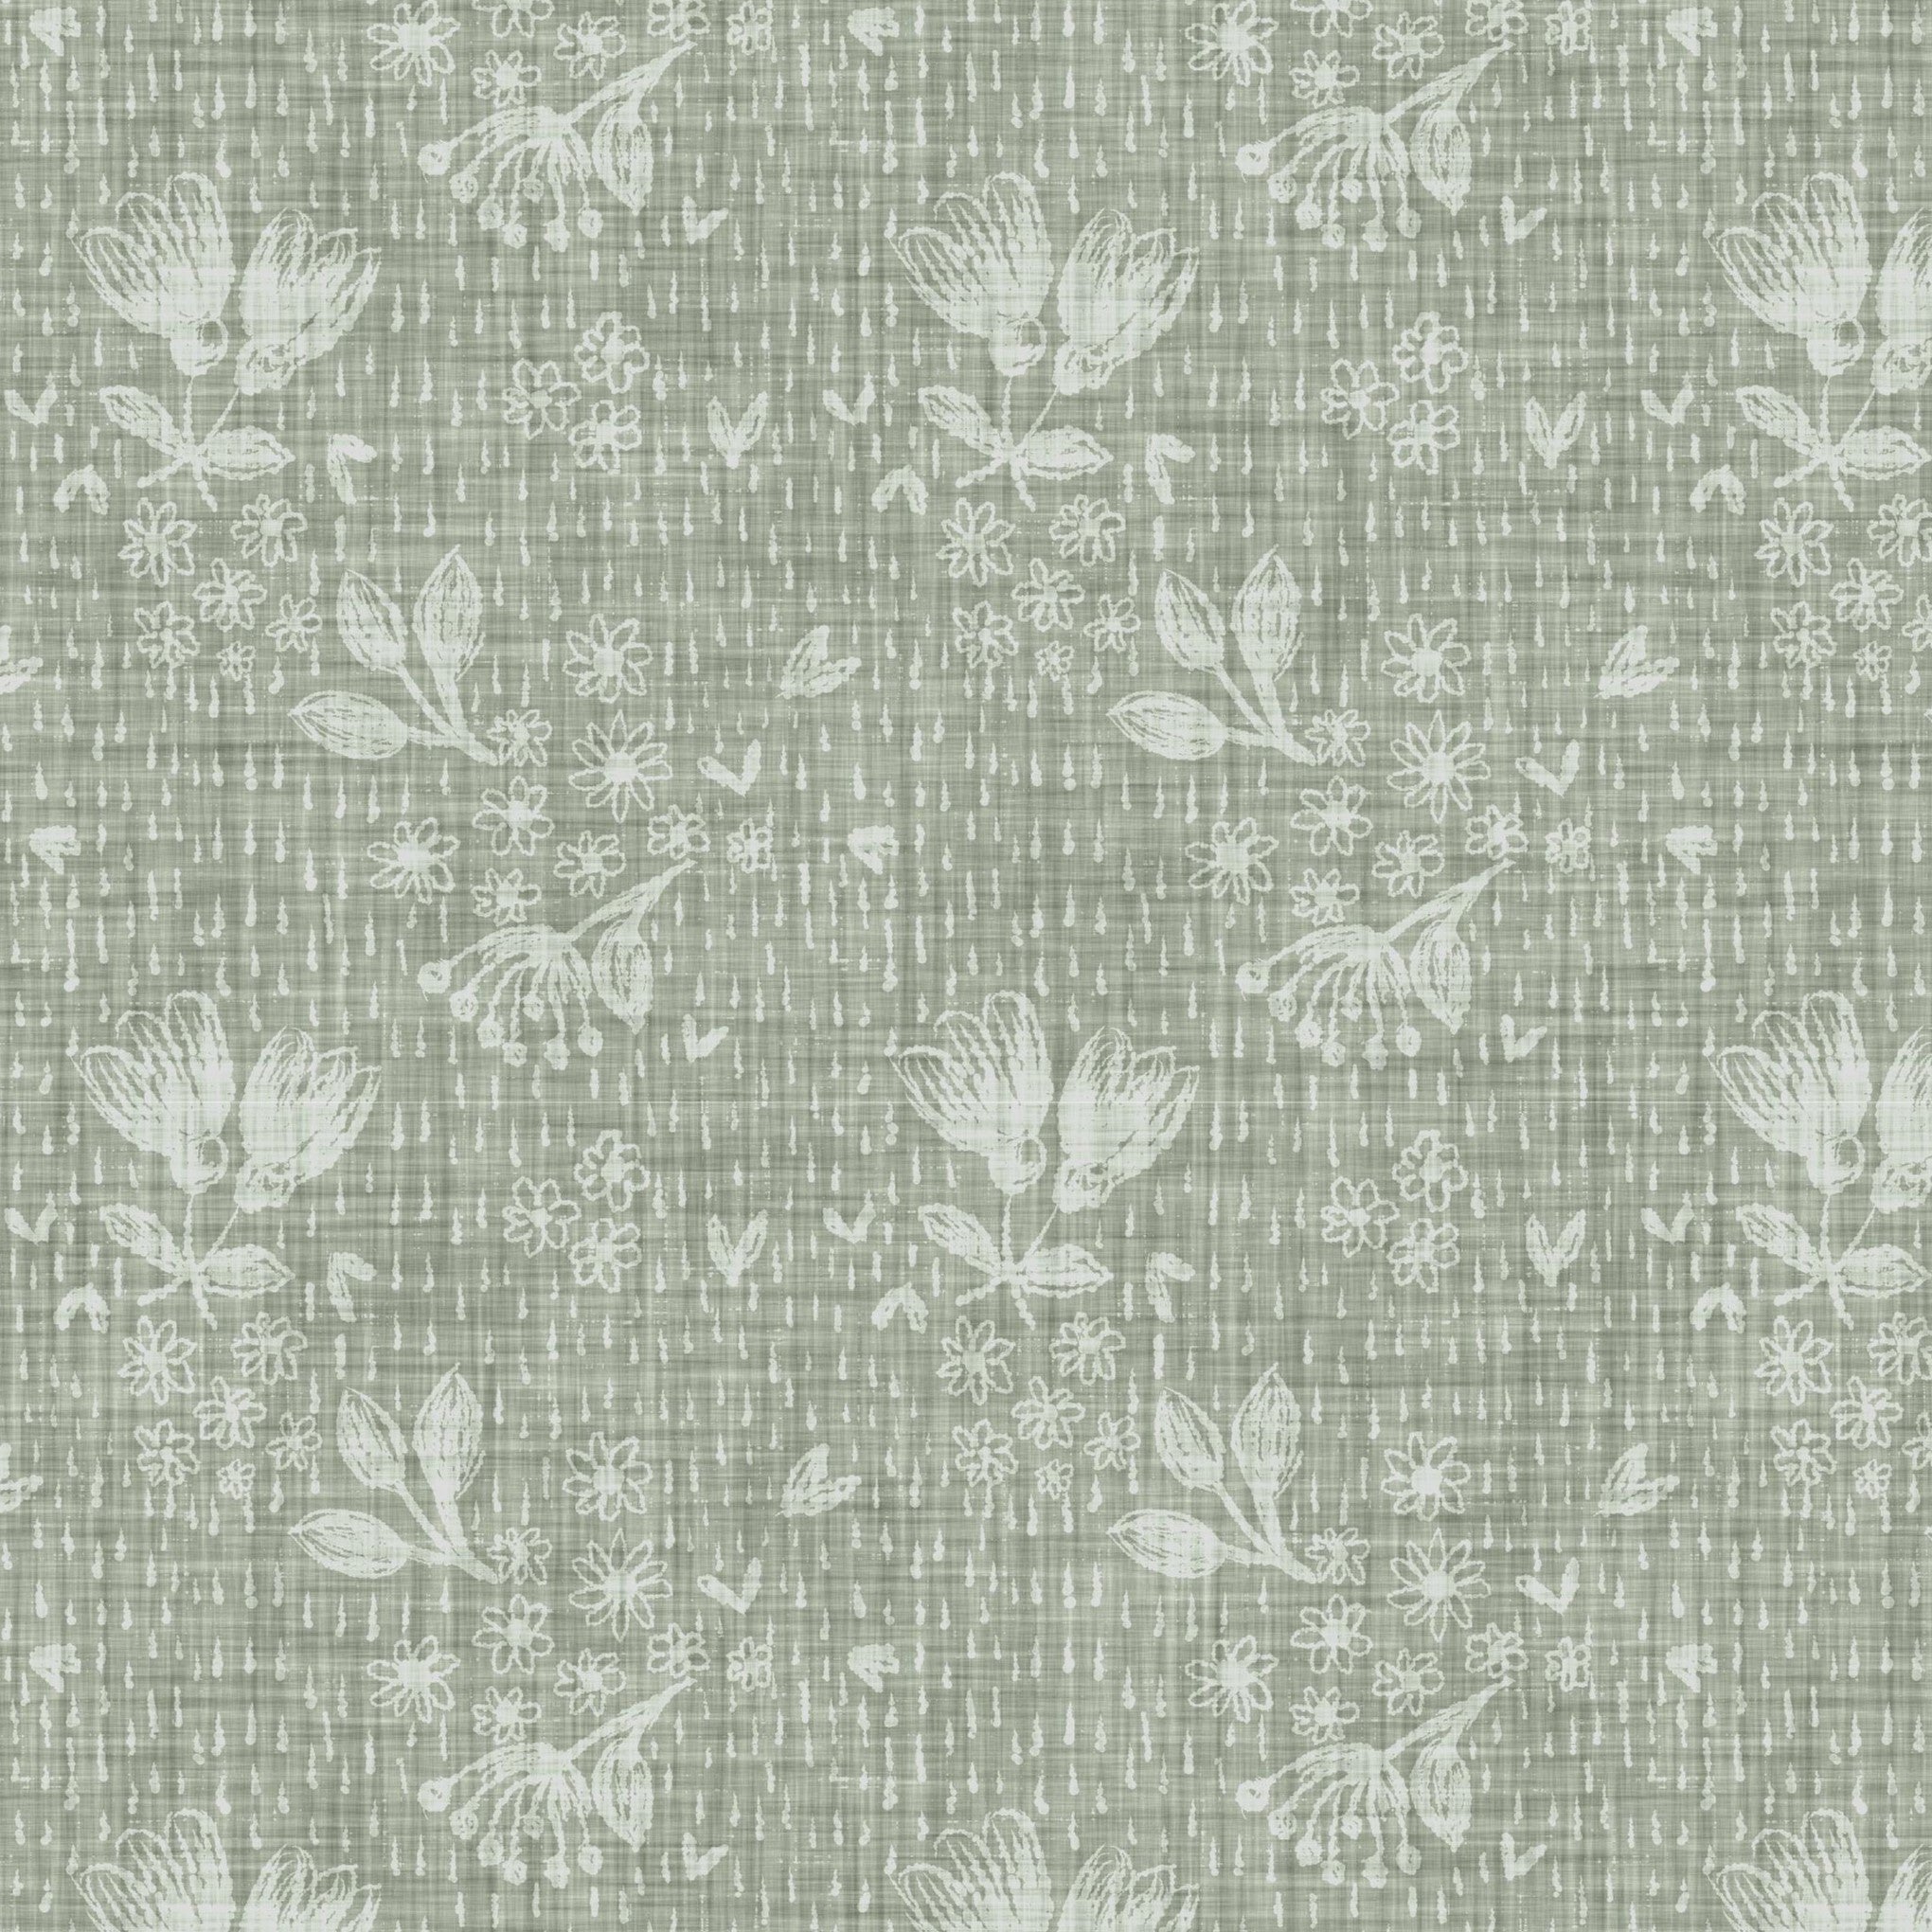 Willow Removable Wallpaper Peel and Stick Self-adhesive Wallpaper